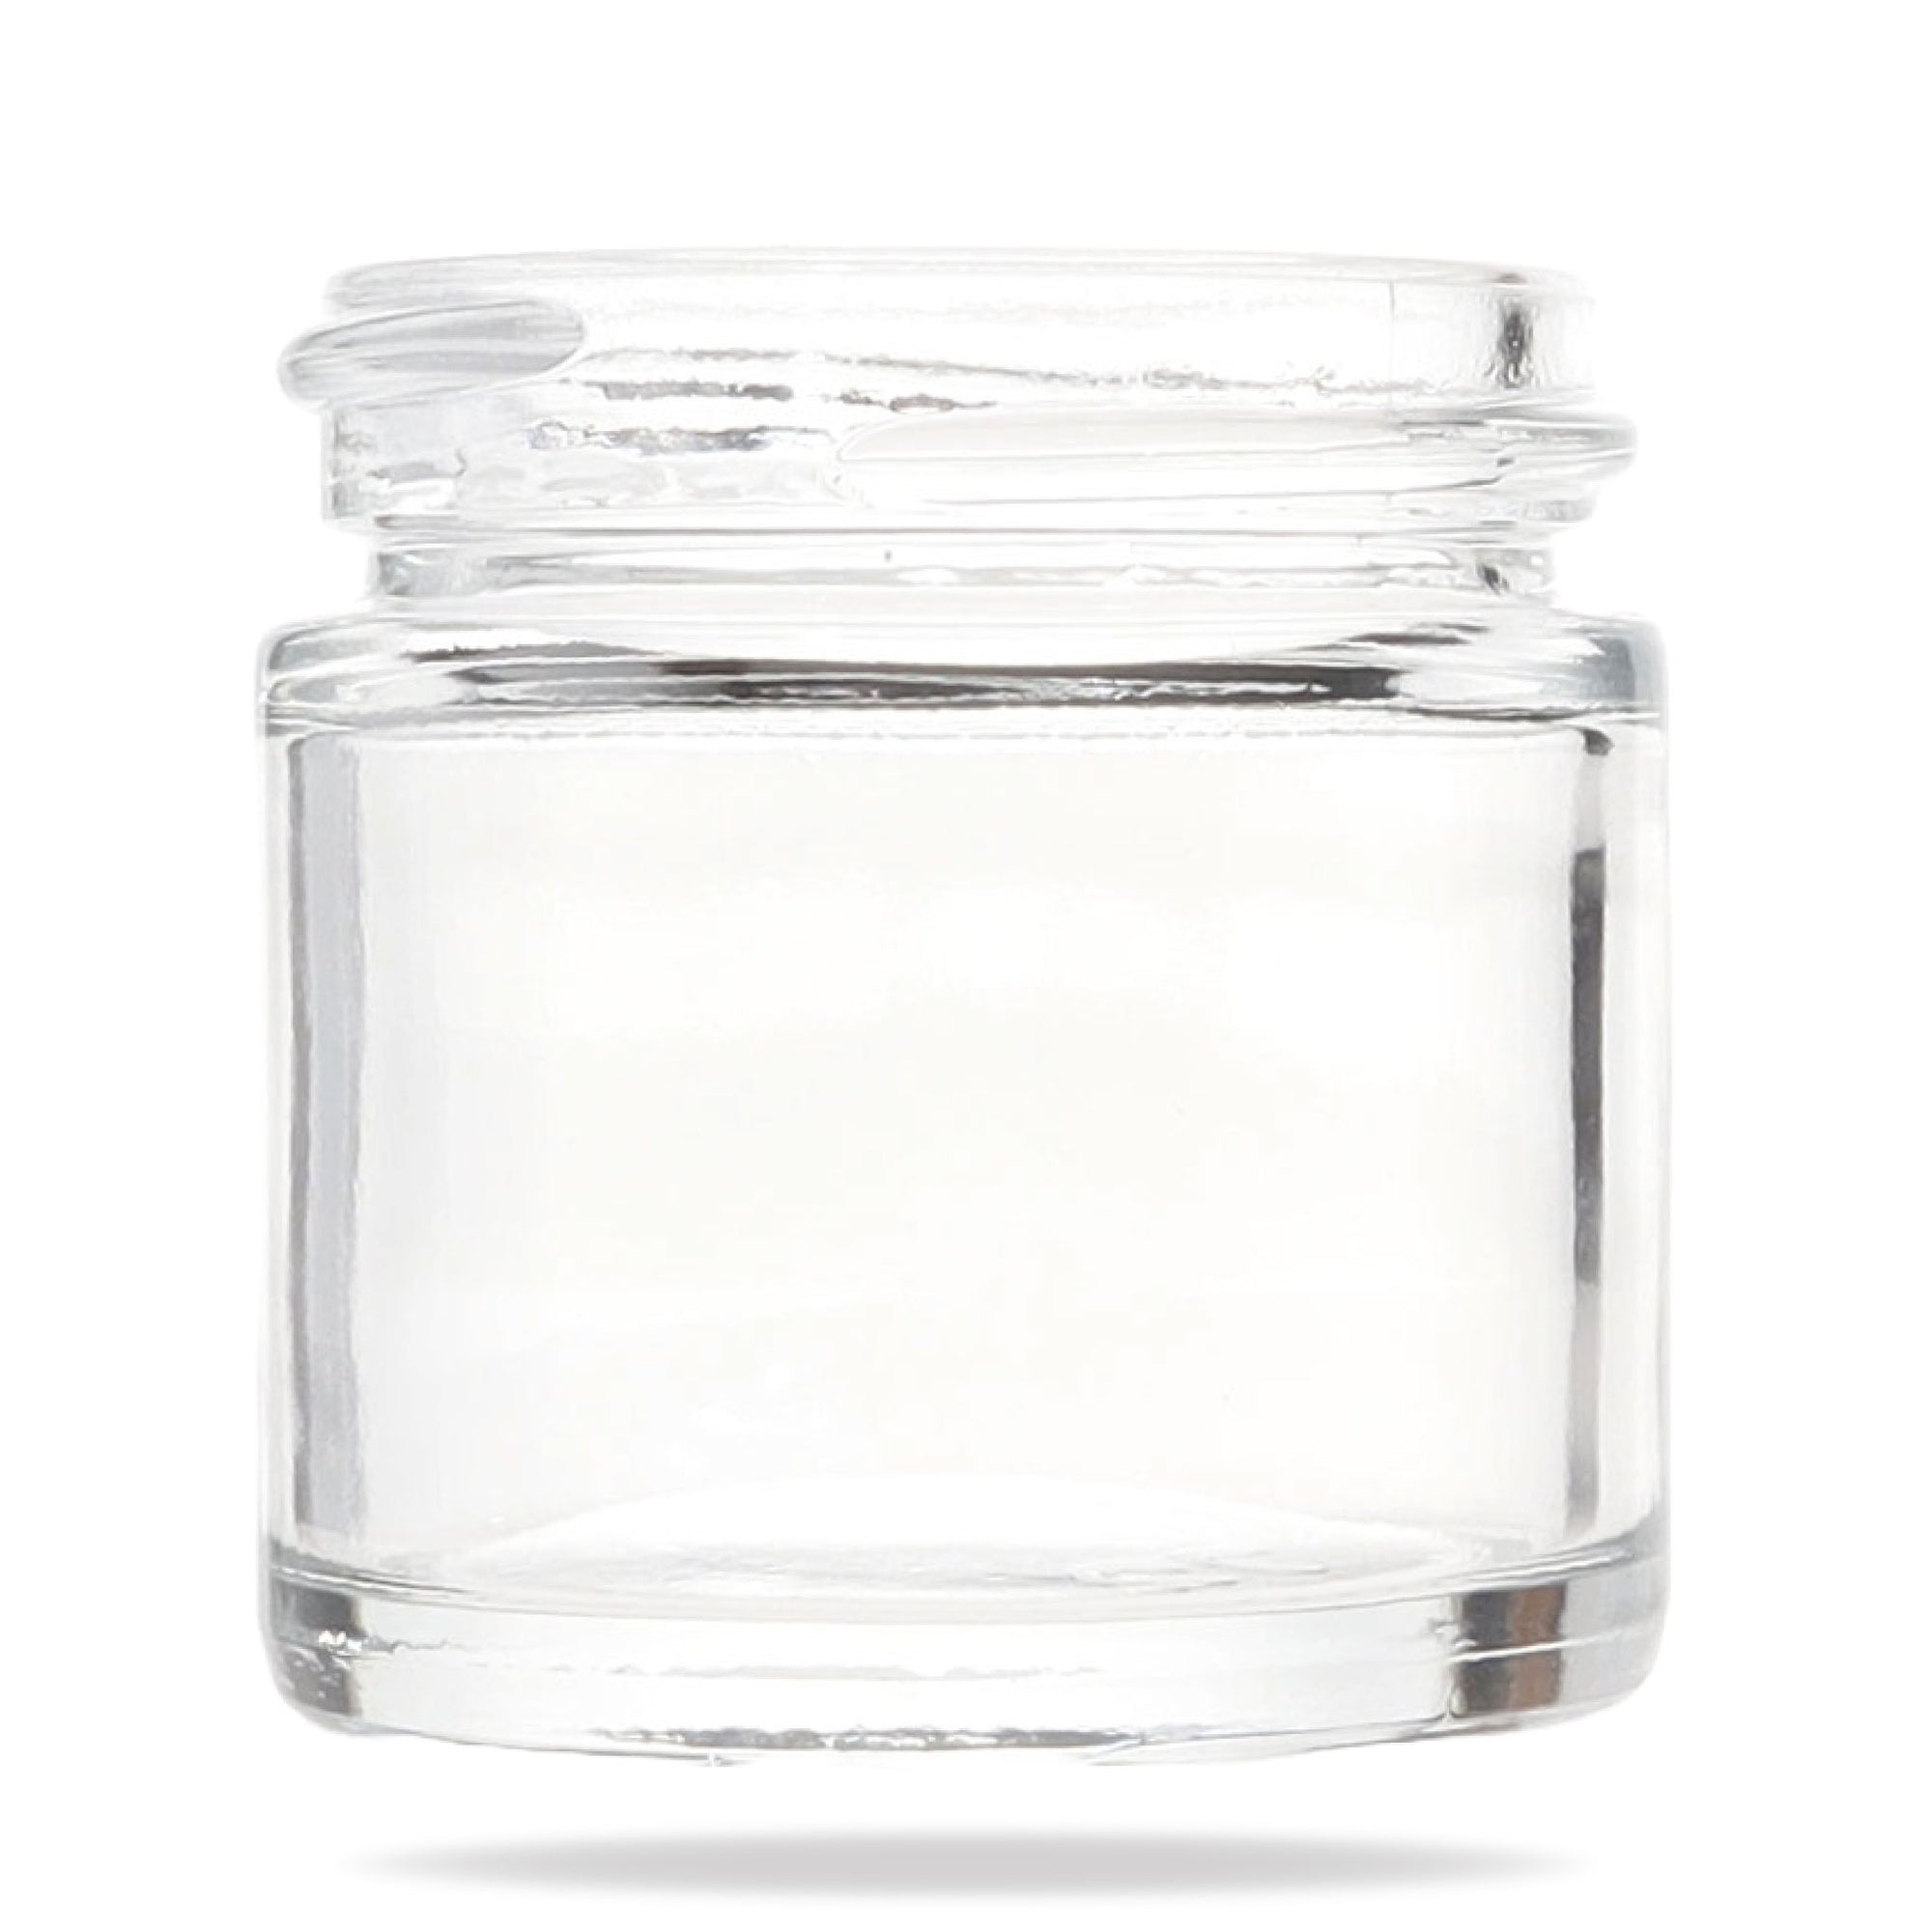 Image of a 1 ounce glass jar with no lid.